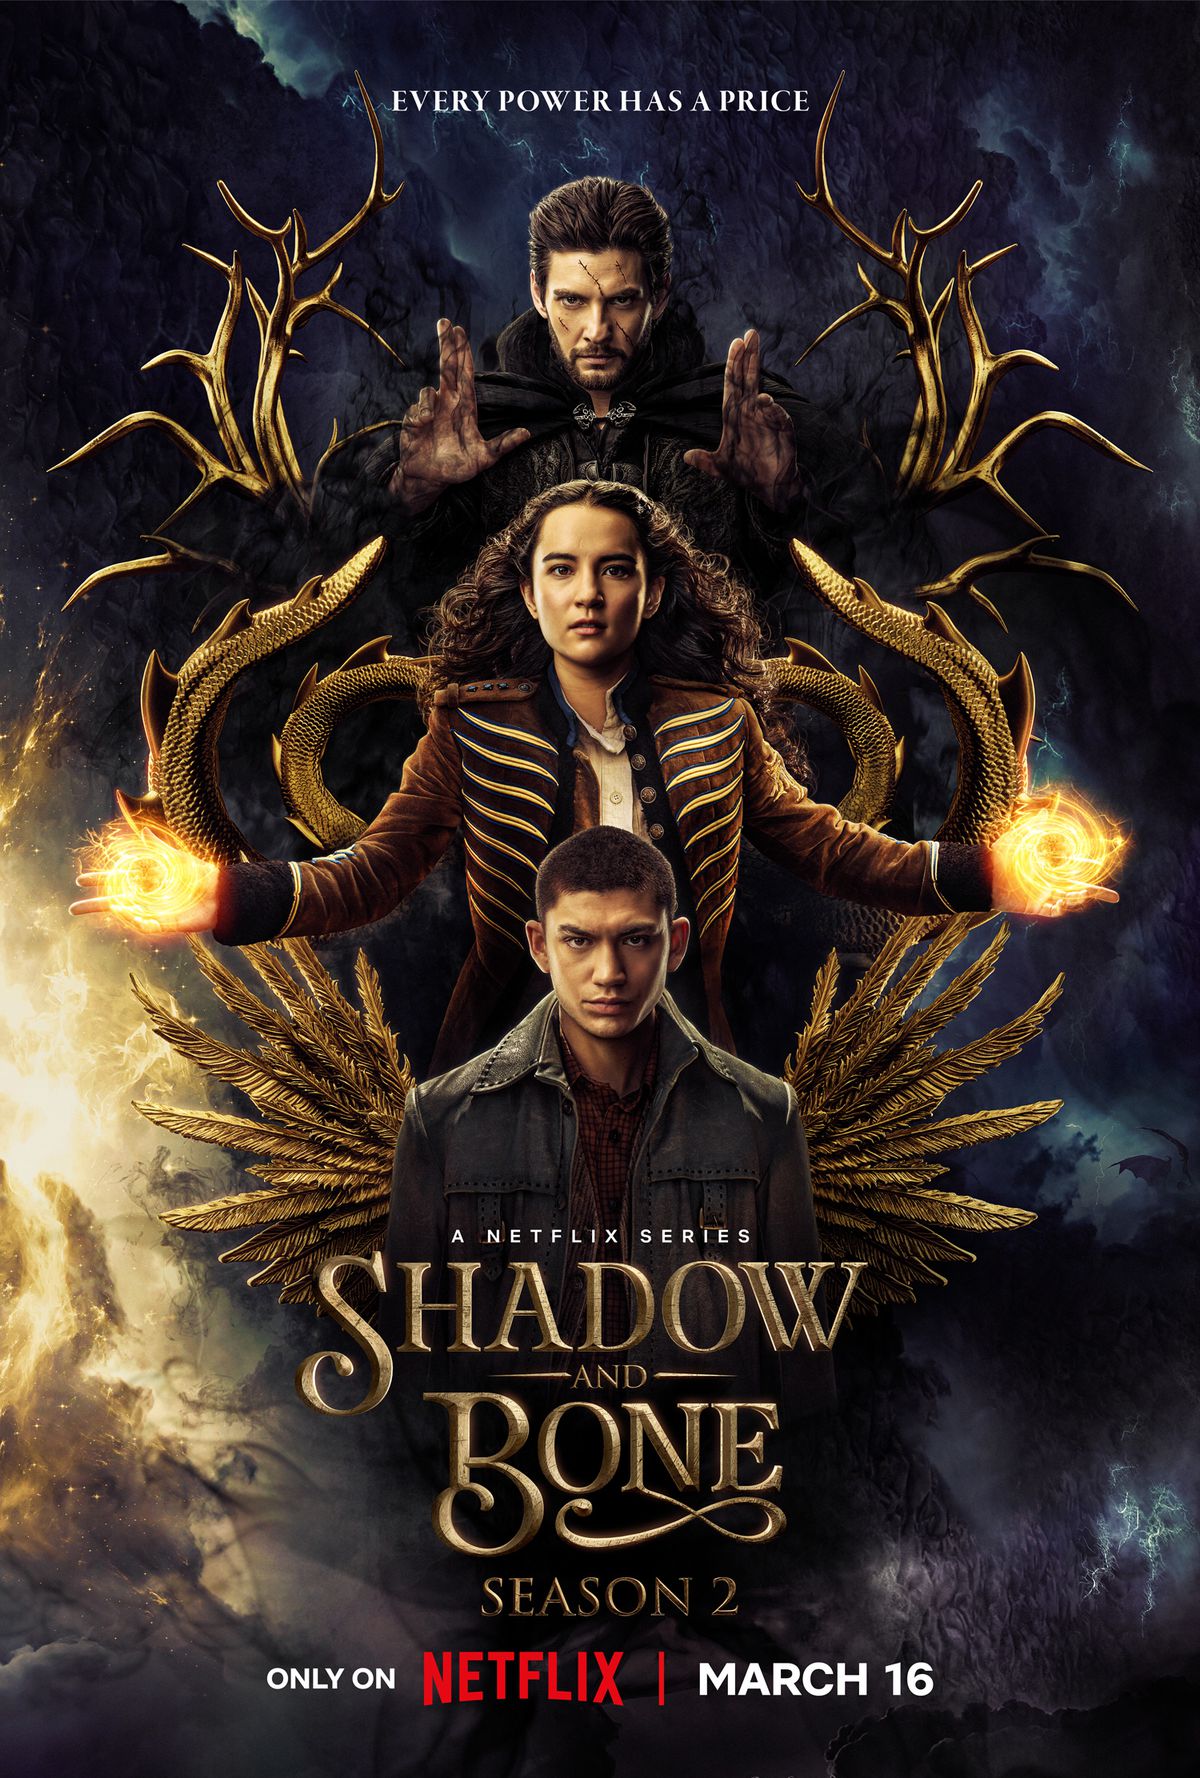 A poster featuring the darkling, alina, and mal all stacked on top of each other. the darkling is framed by antlers, alina is framed by a sea serpents tail, and mal is framed by the wings of a bird